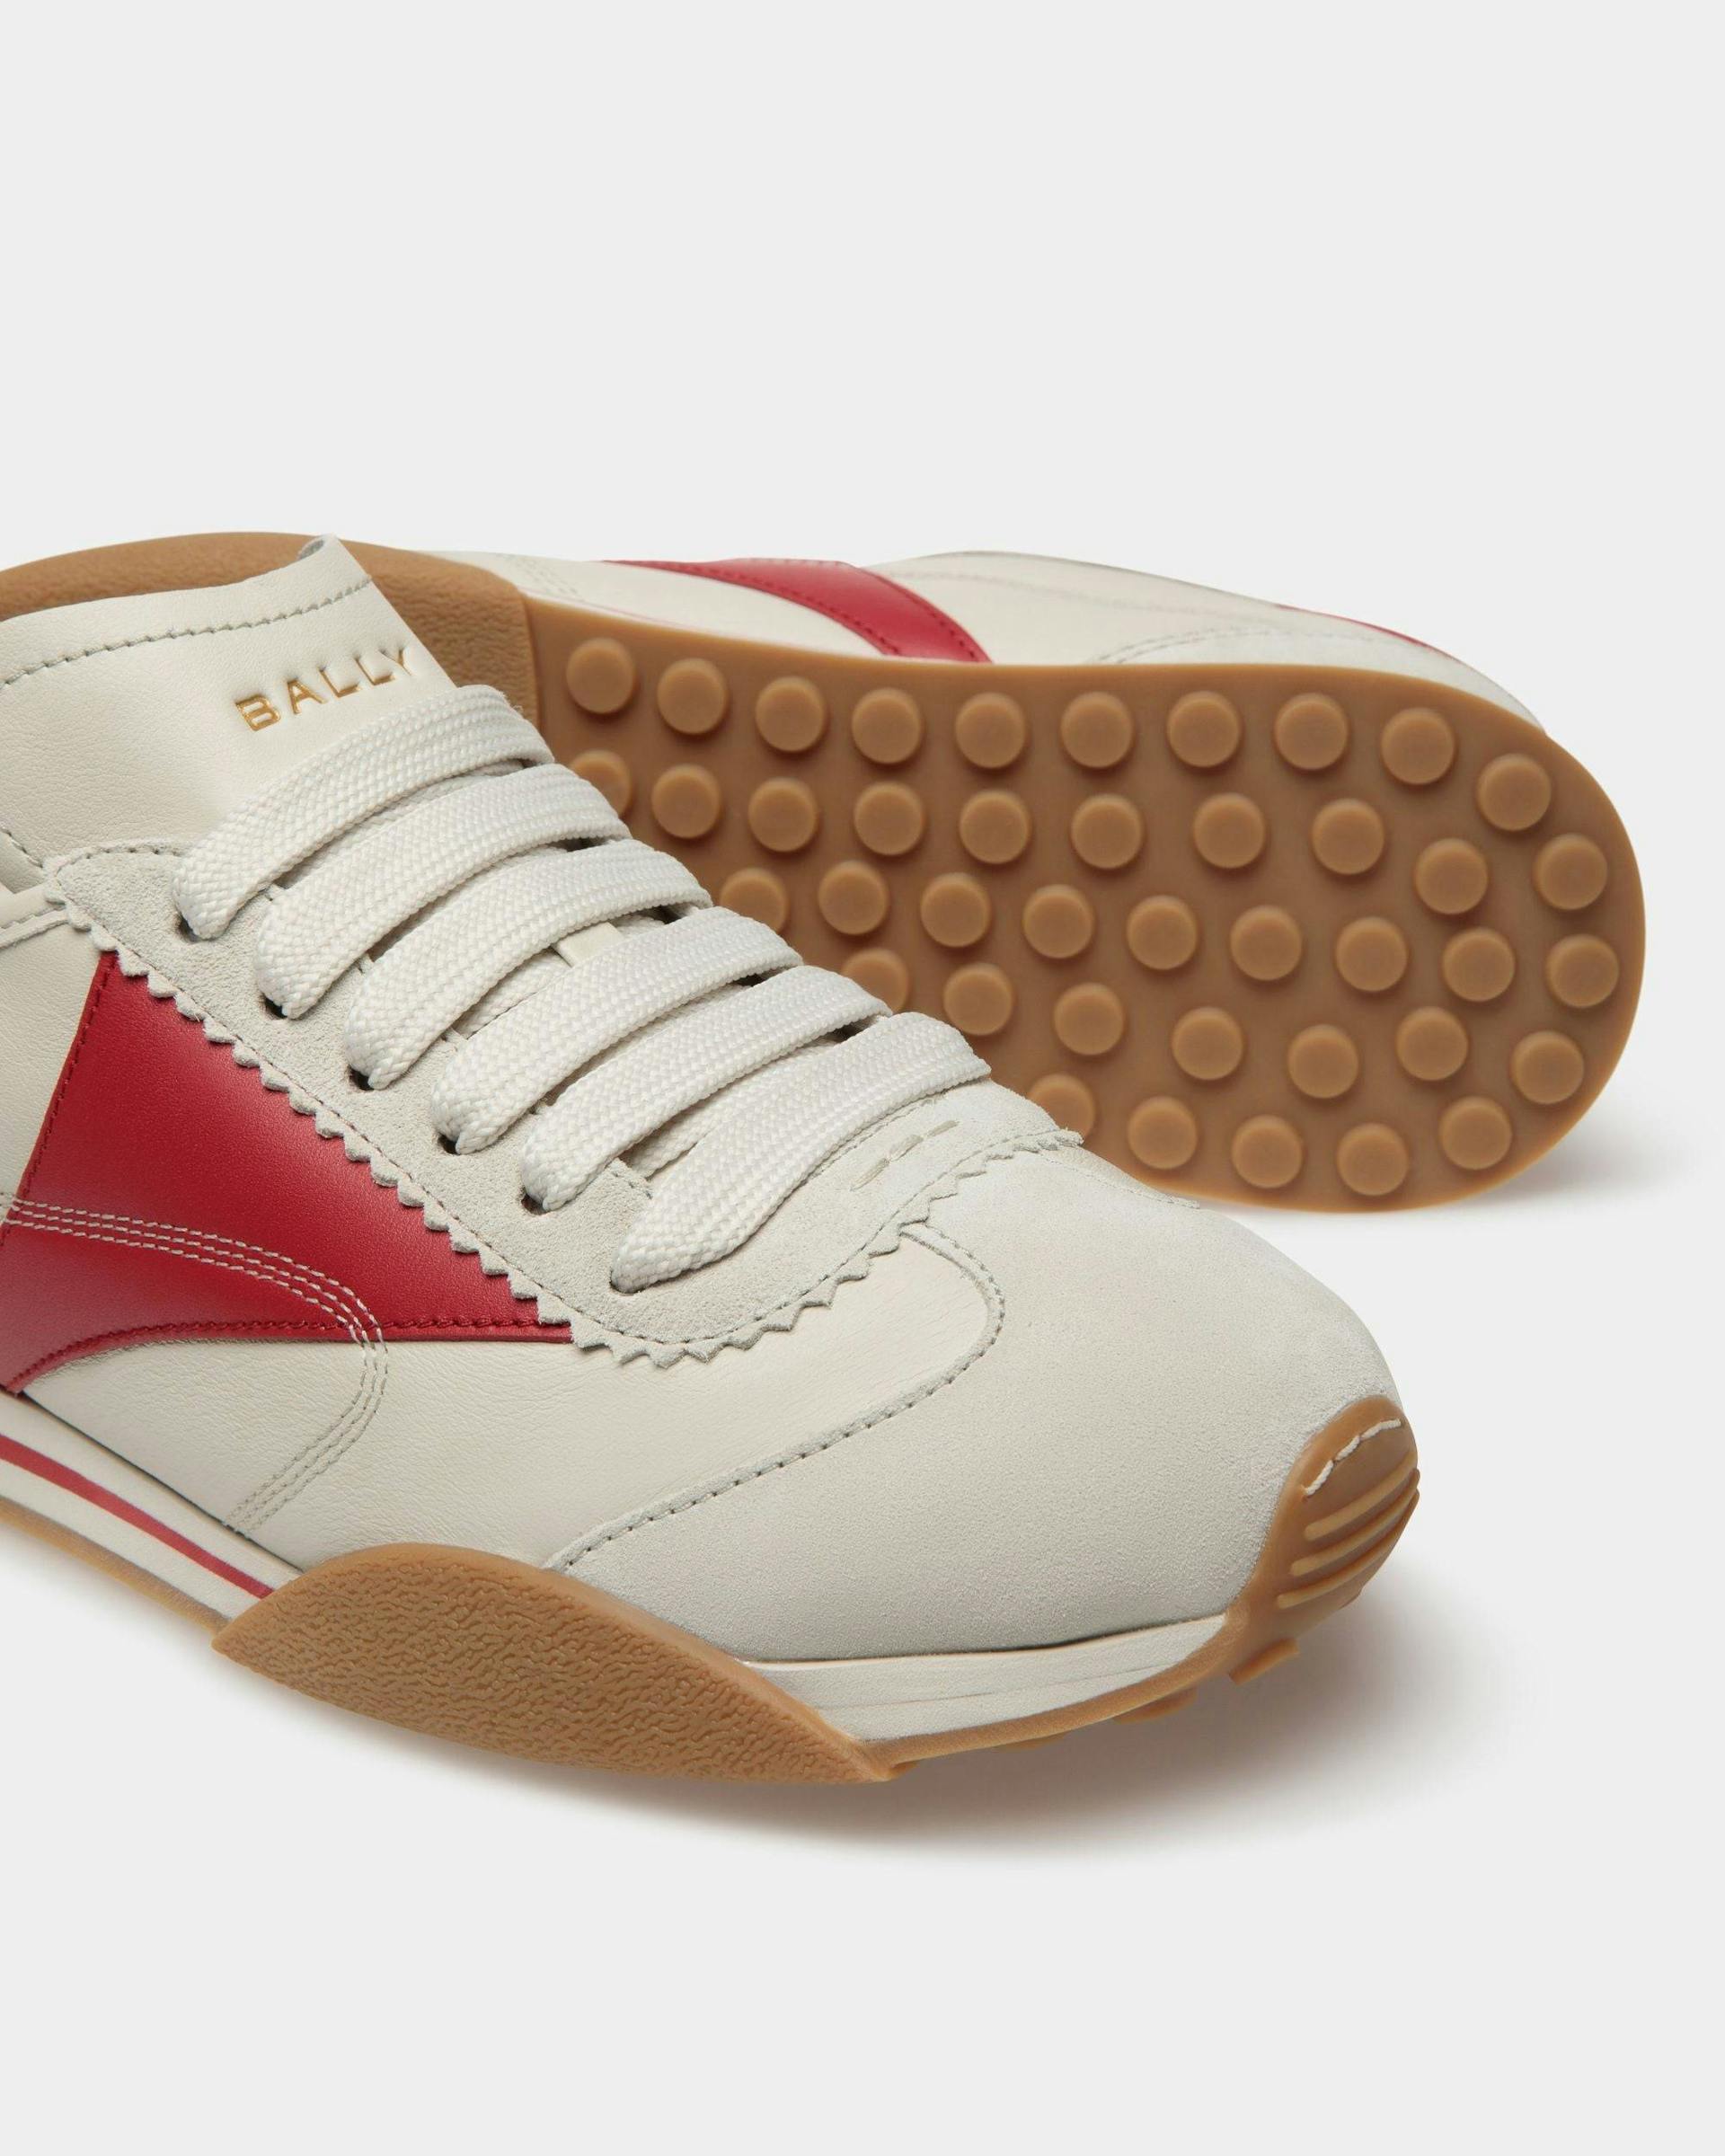 Men's Sussex Sneakers In Dusty White And Deep Ruby Leather | Bally | Still Life Below